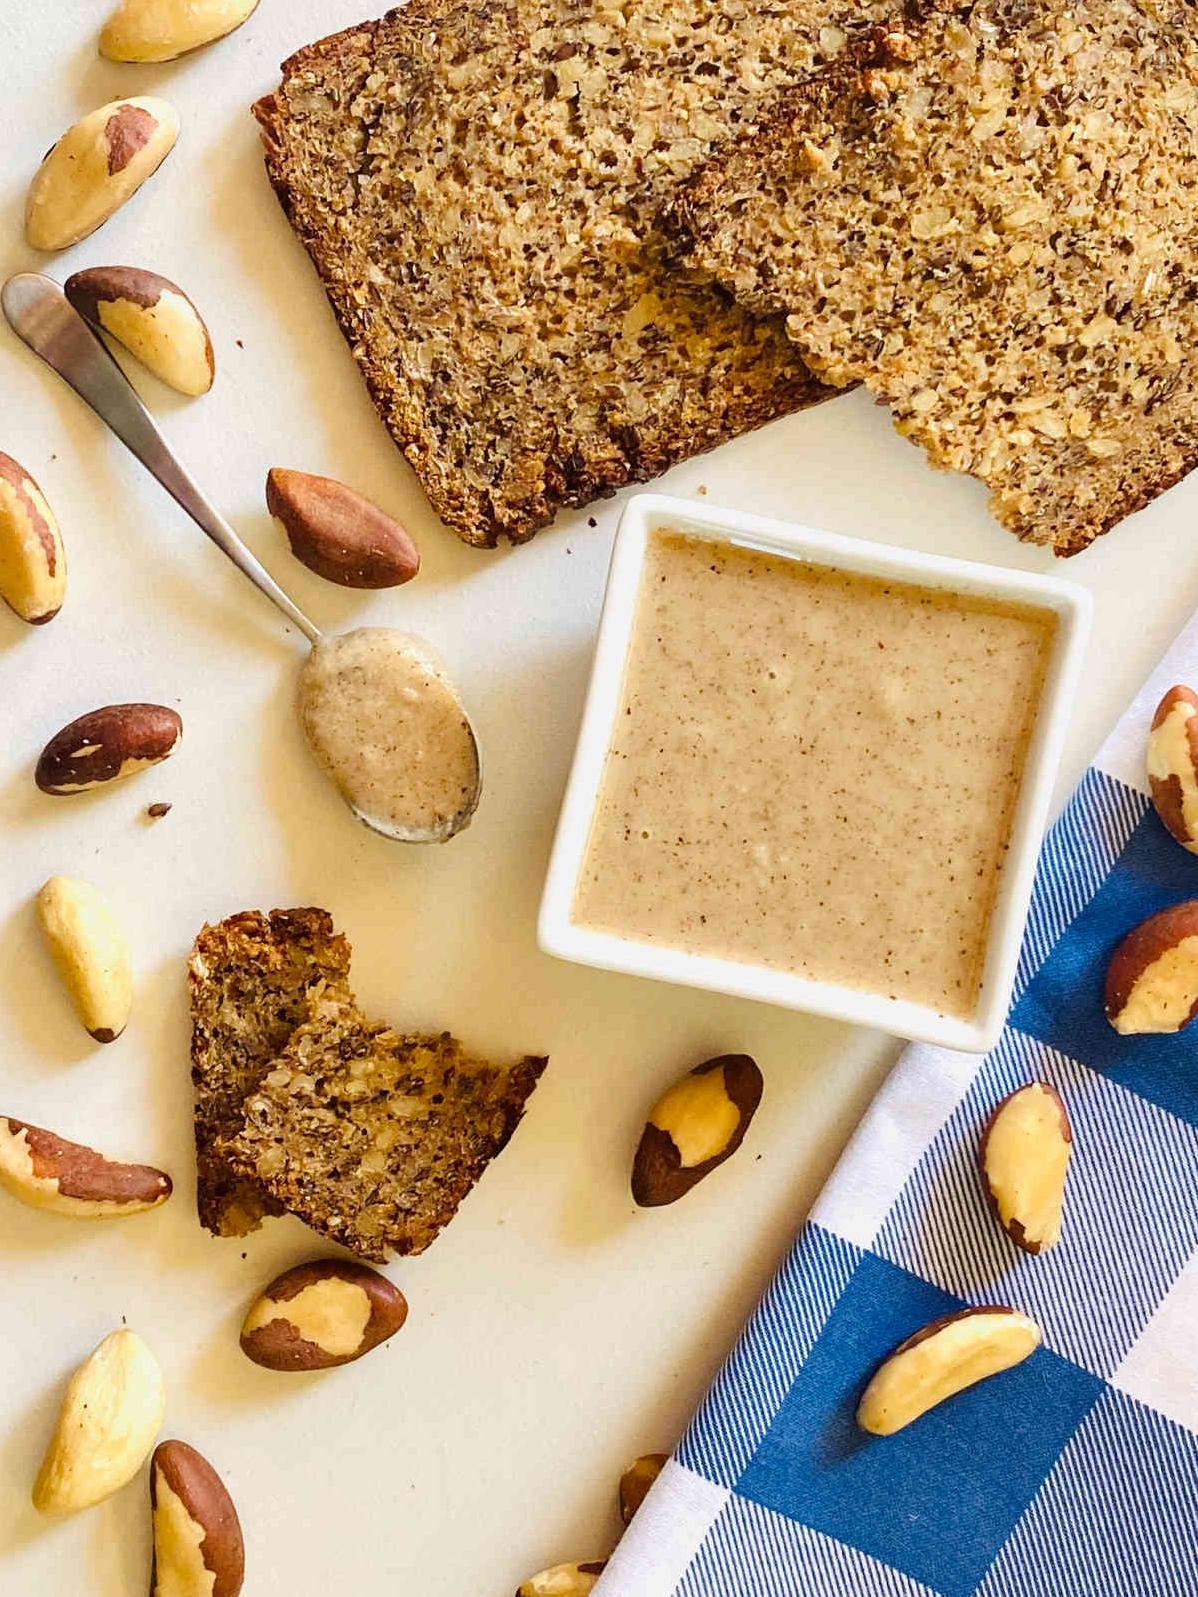  Looking for a fancy topping for your homemade cakes? Brazil Nut Hard Sauce will do the trick.